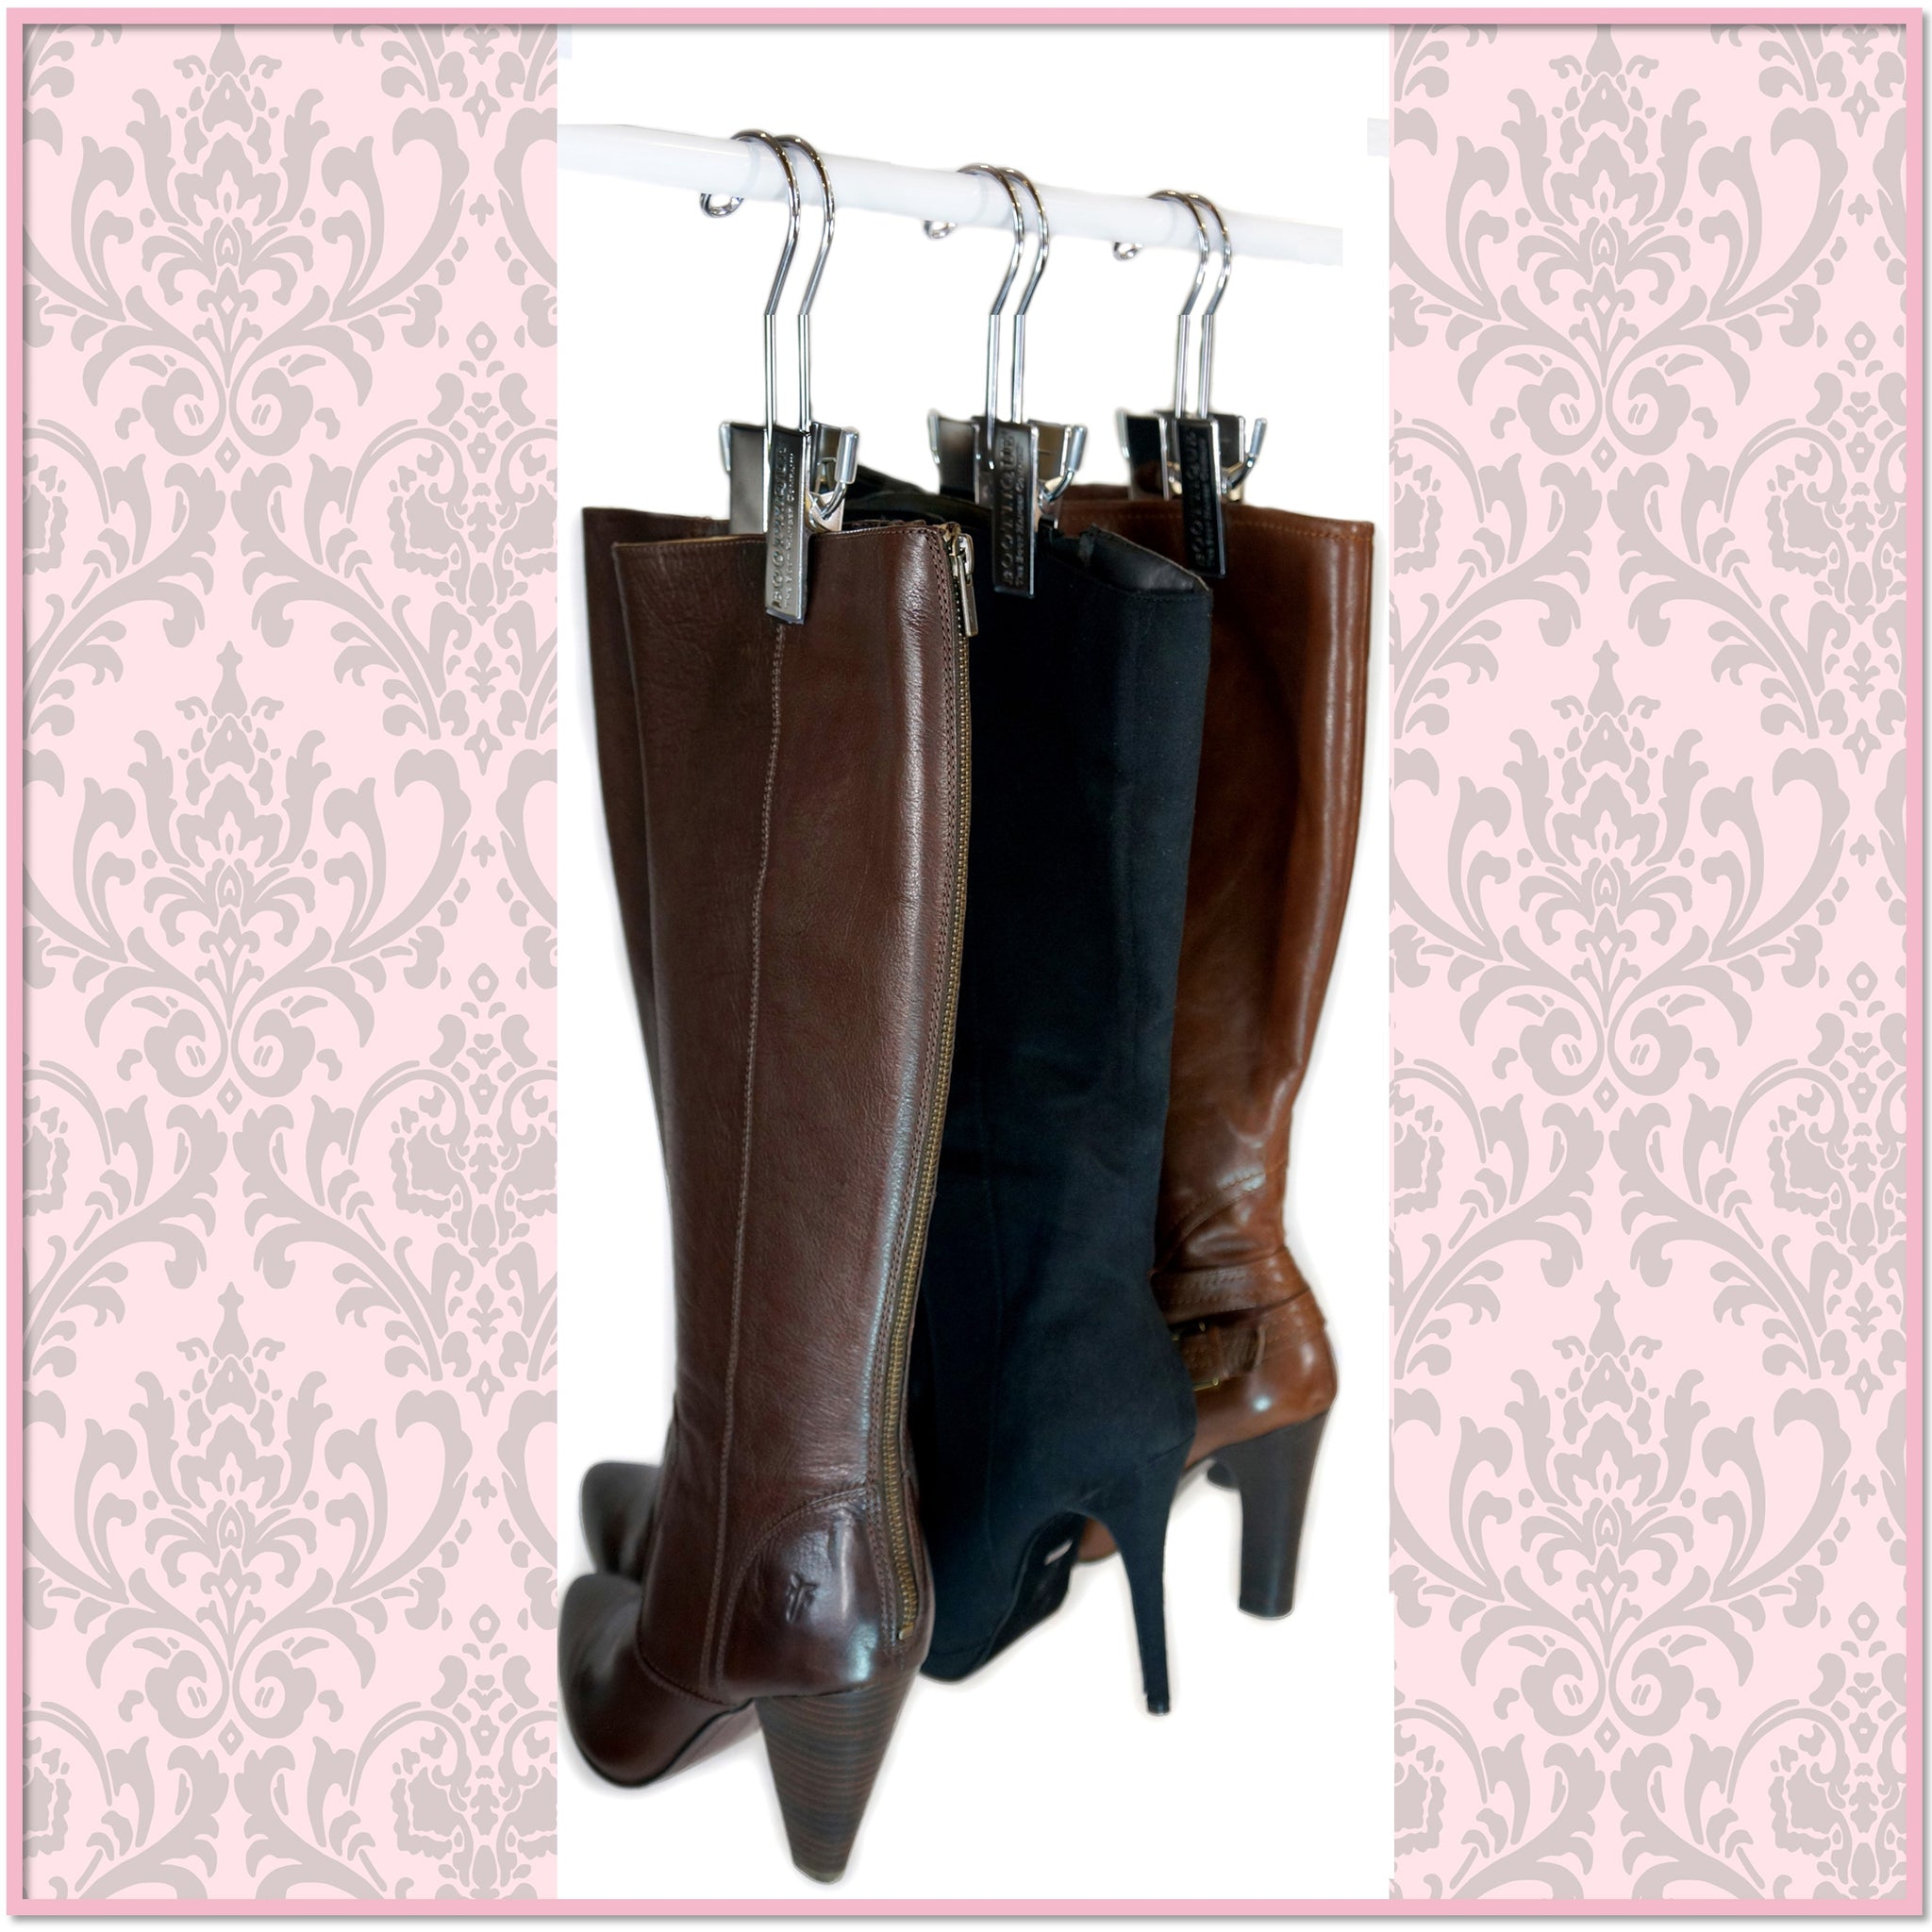 Boottique Inc. Boot Stax Hanging Shoe Organizer